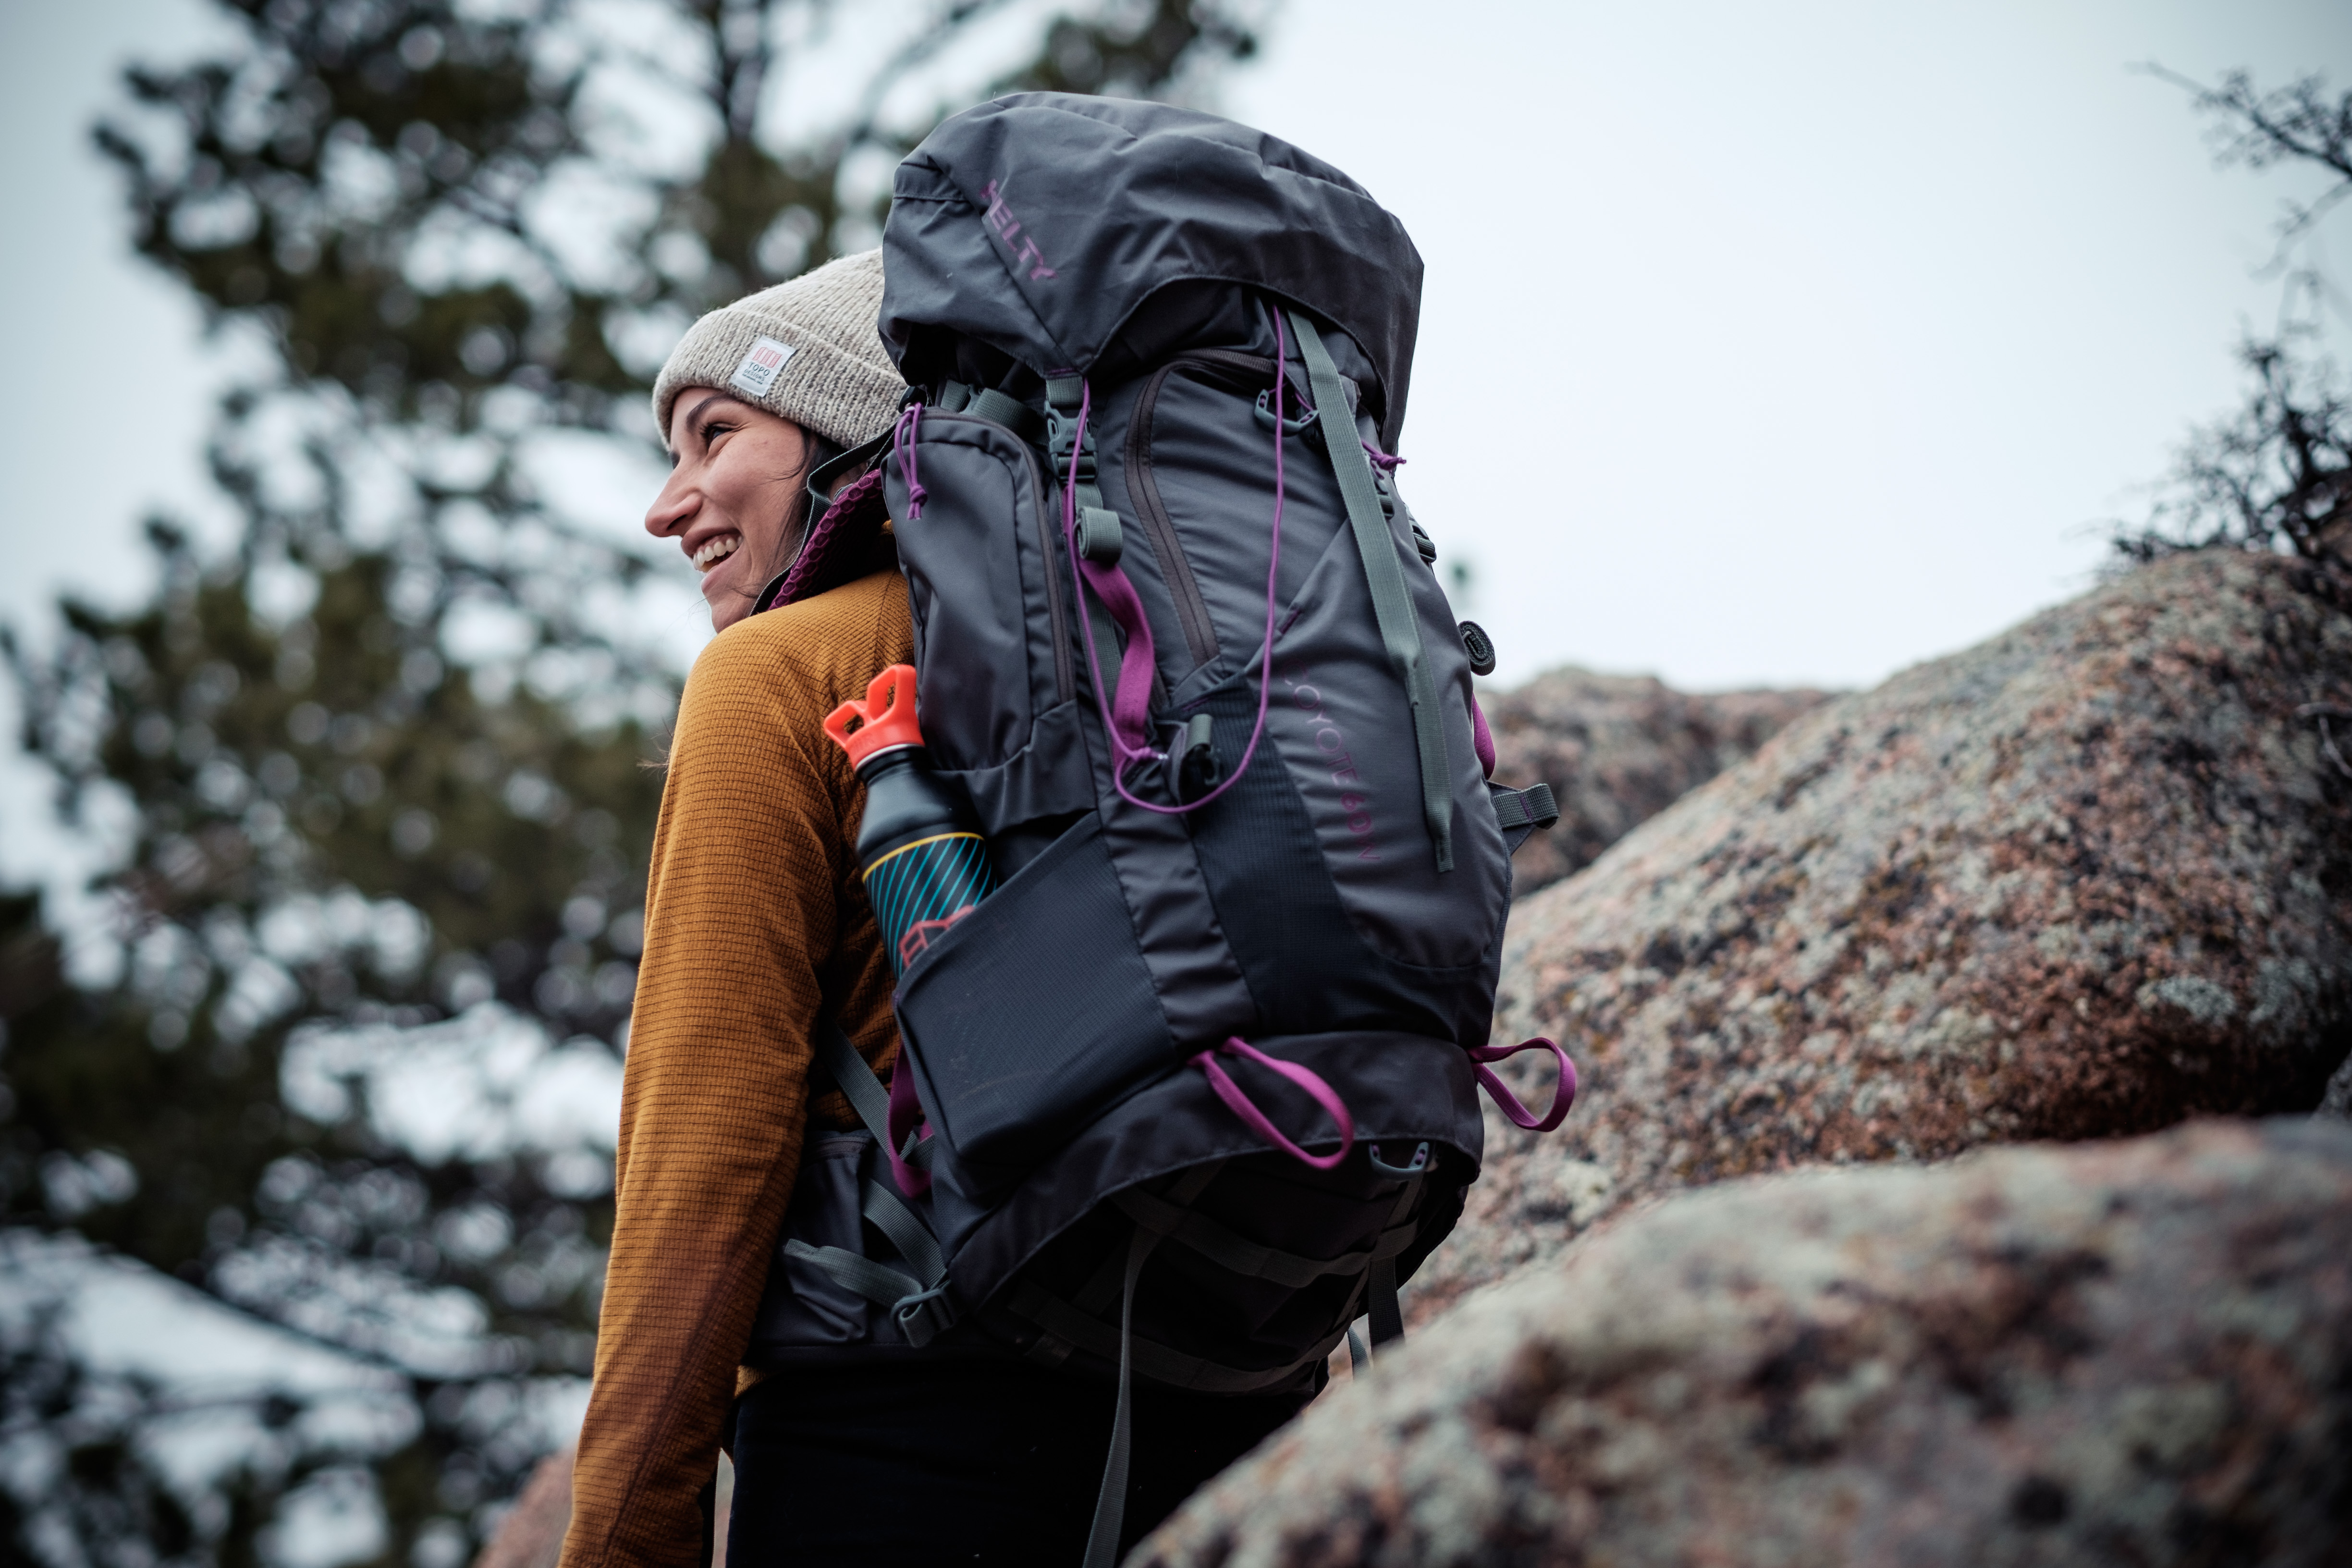 Know Before You Go: Solo Backpacking Safety - Kelty